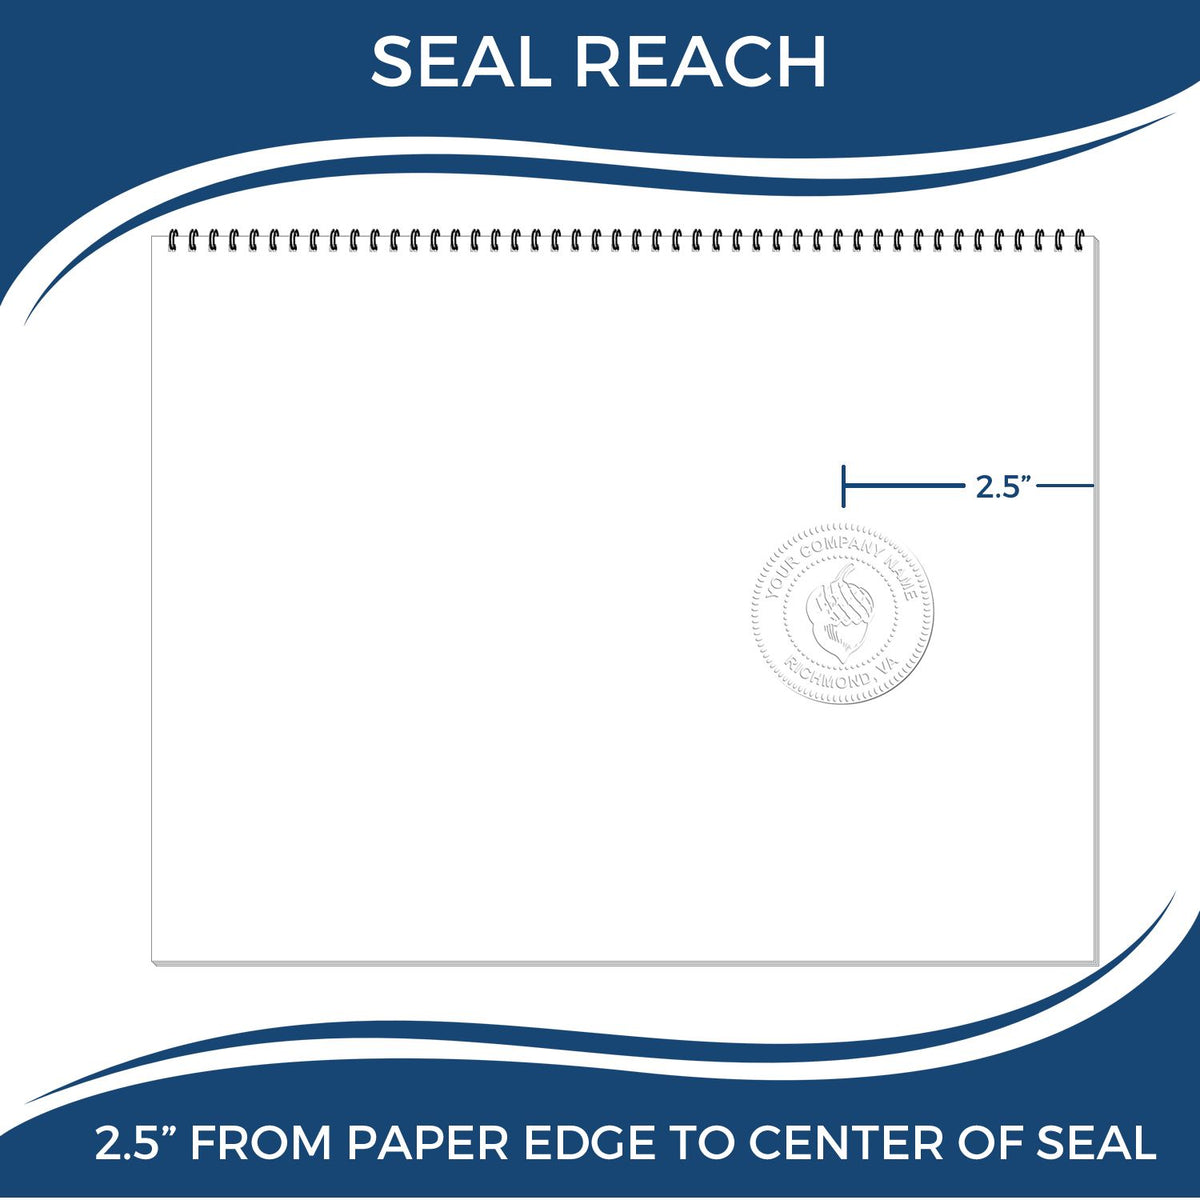 An infographic showing the seal reach which is represented by a ruler and a miniature seal image of the Heavy Duty Cast Iron Guam Geologist Seal Embosser